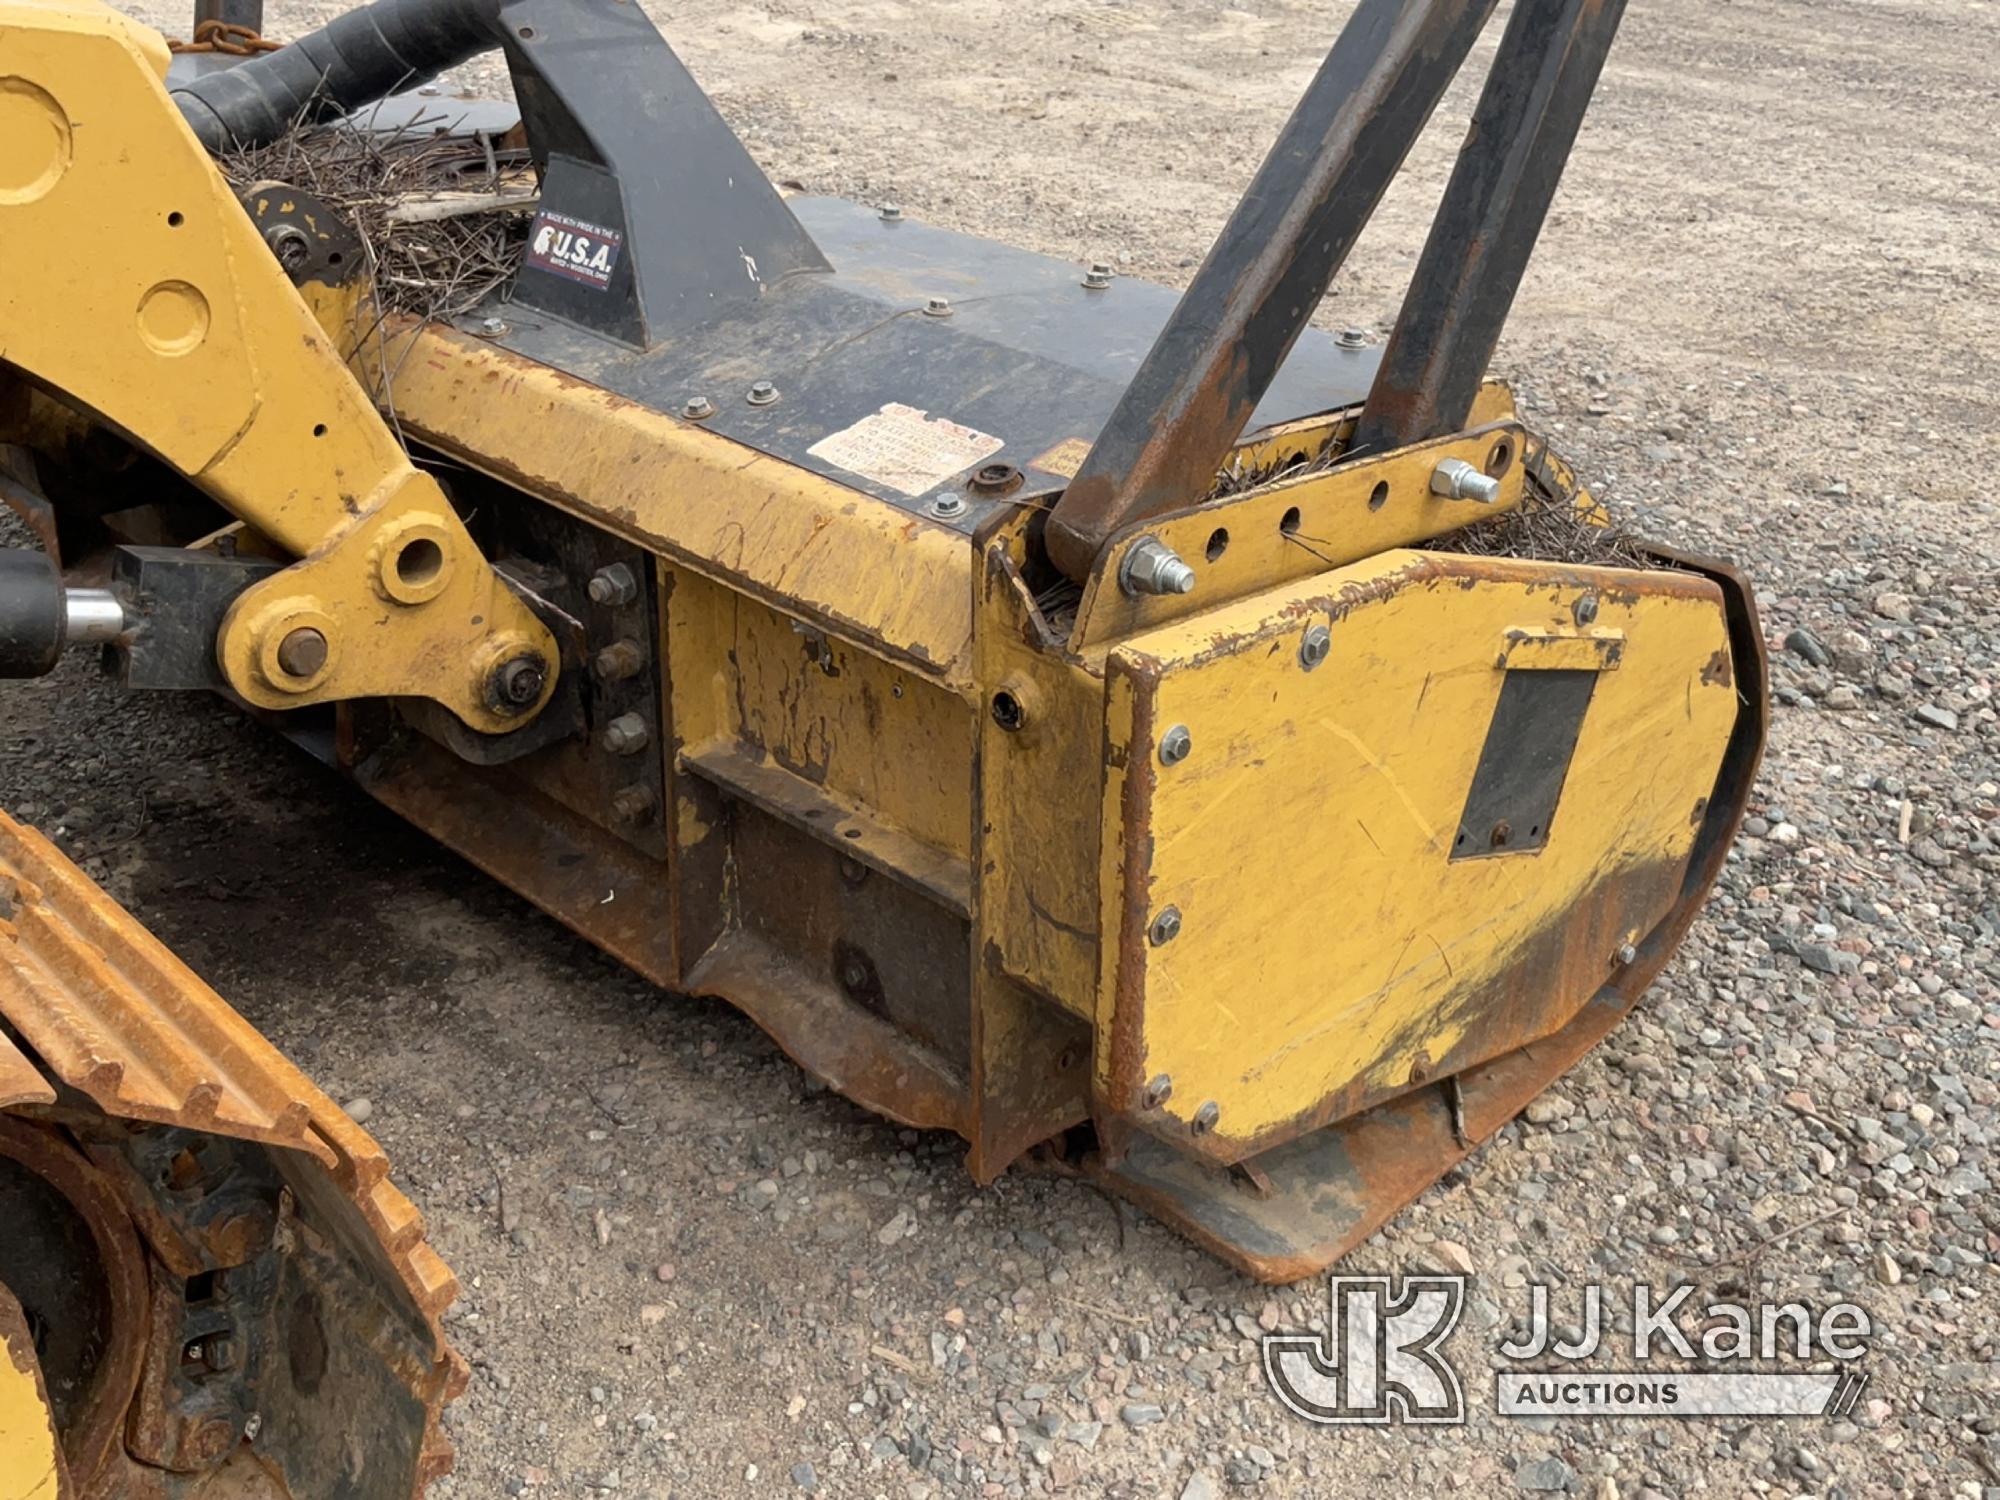 (Superior, WI) 2018 Rayco C200 Tracked Skid Steer Loader, Item 1415108 is attached. PLEASE SELL TOGE